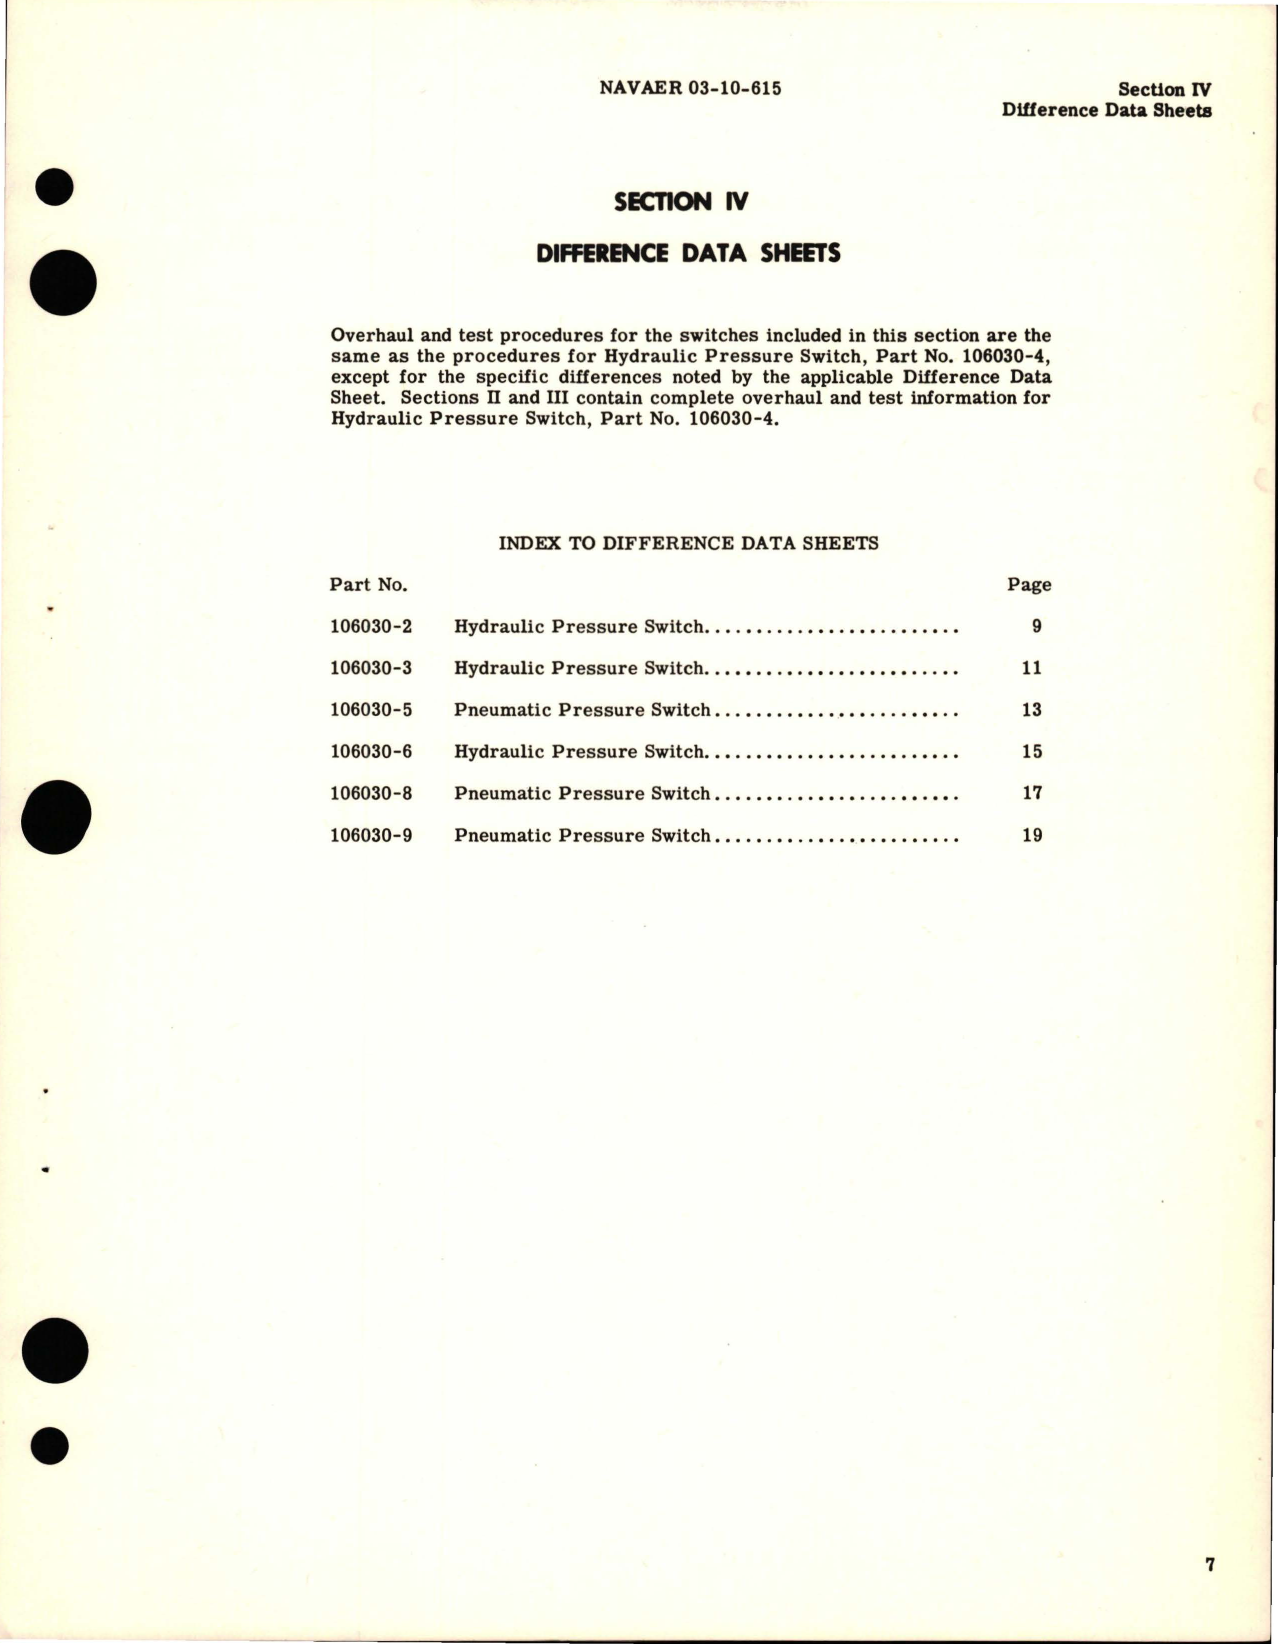 Sample page 9 from AirCorps Library document: Overhaul Instructions for Hydraulic and Pneumatic Pressure Switches 